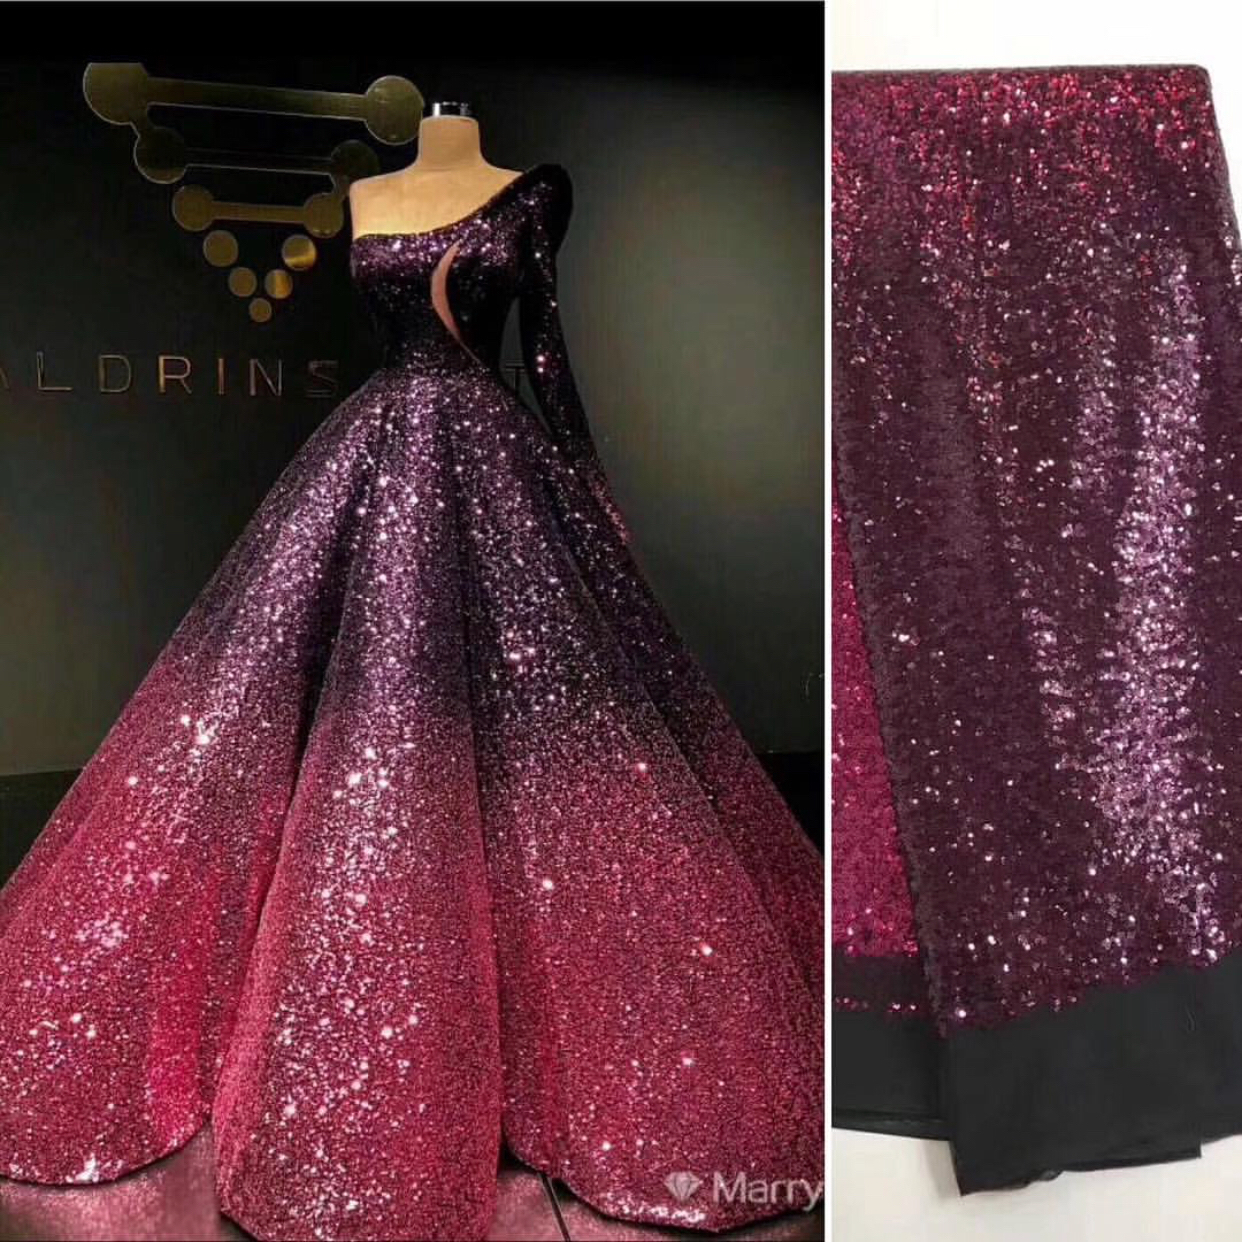 Prom Ball Gown, Ball Gown Prom Dress, Gradient Prom Dress, Sequin Prom Dress, Luxury Prom Dress, Long Sleeve Prom Dress, One Shoulder Prom Dress,